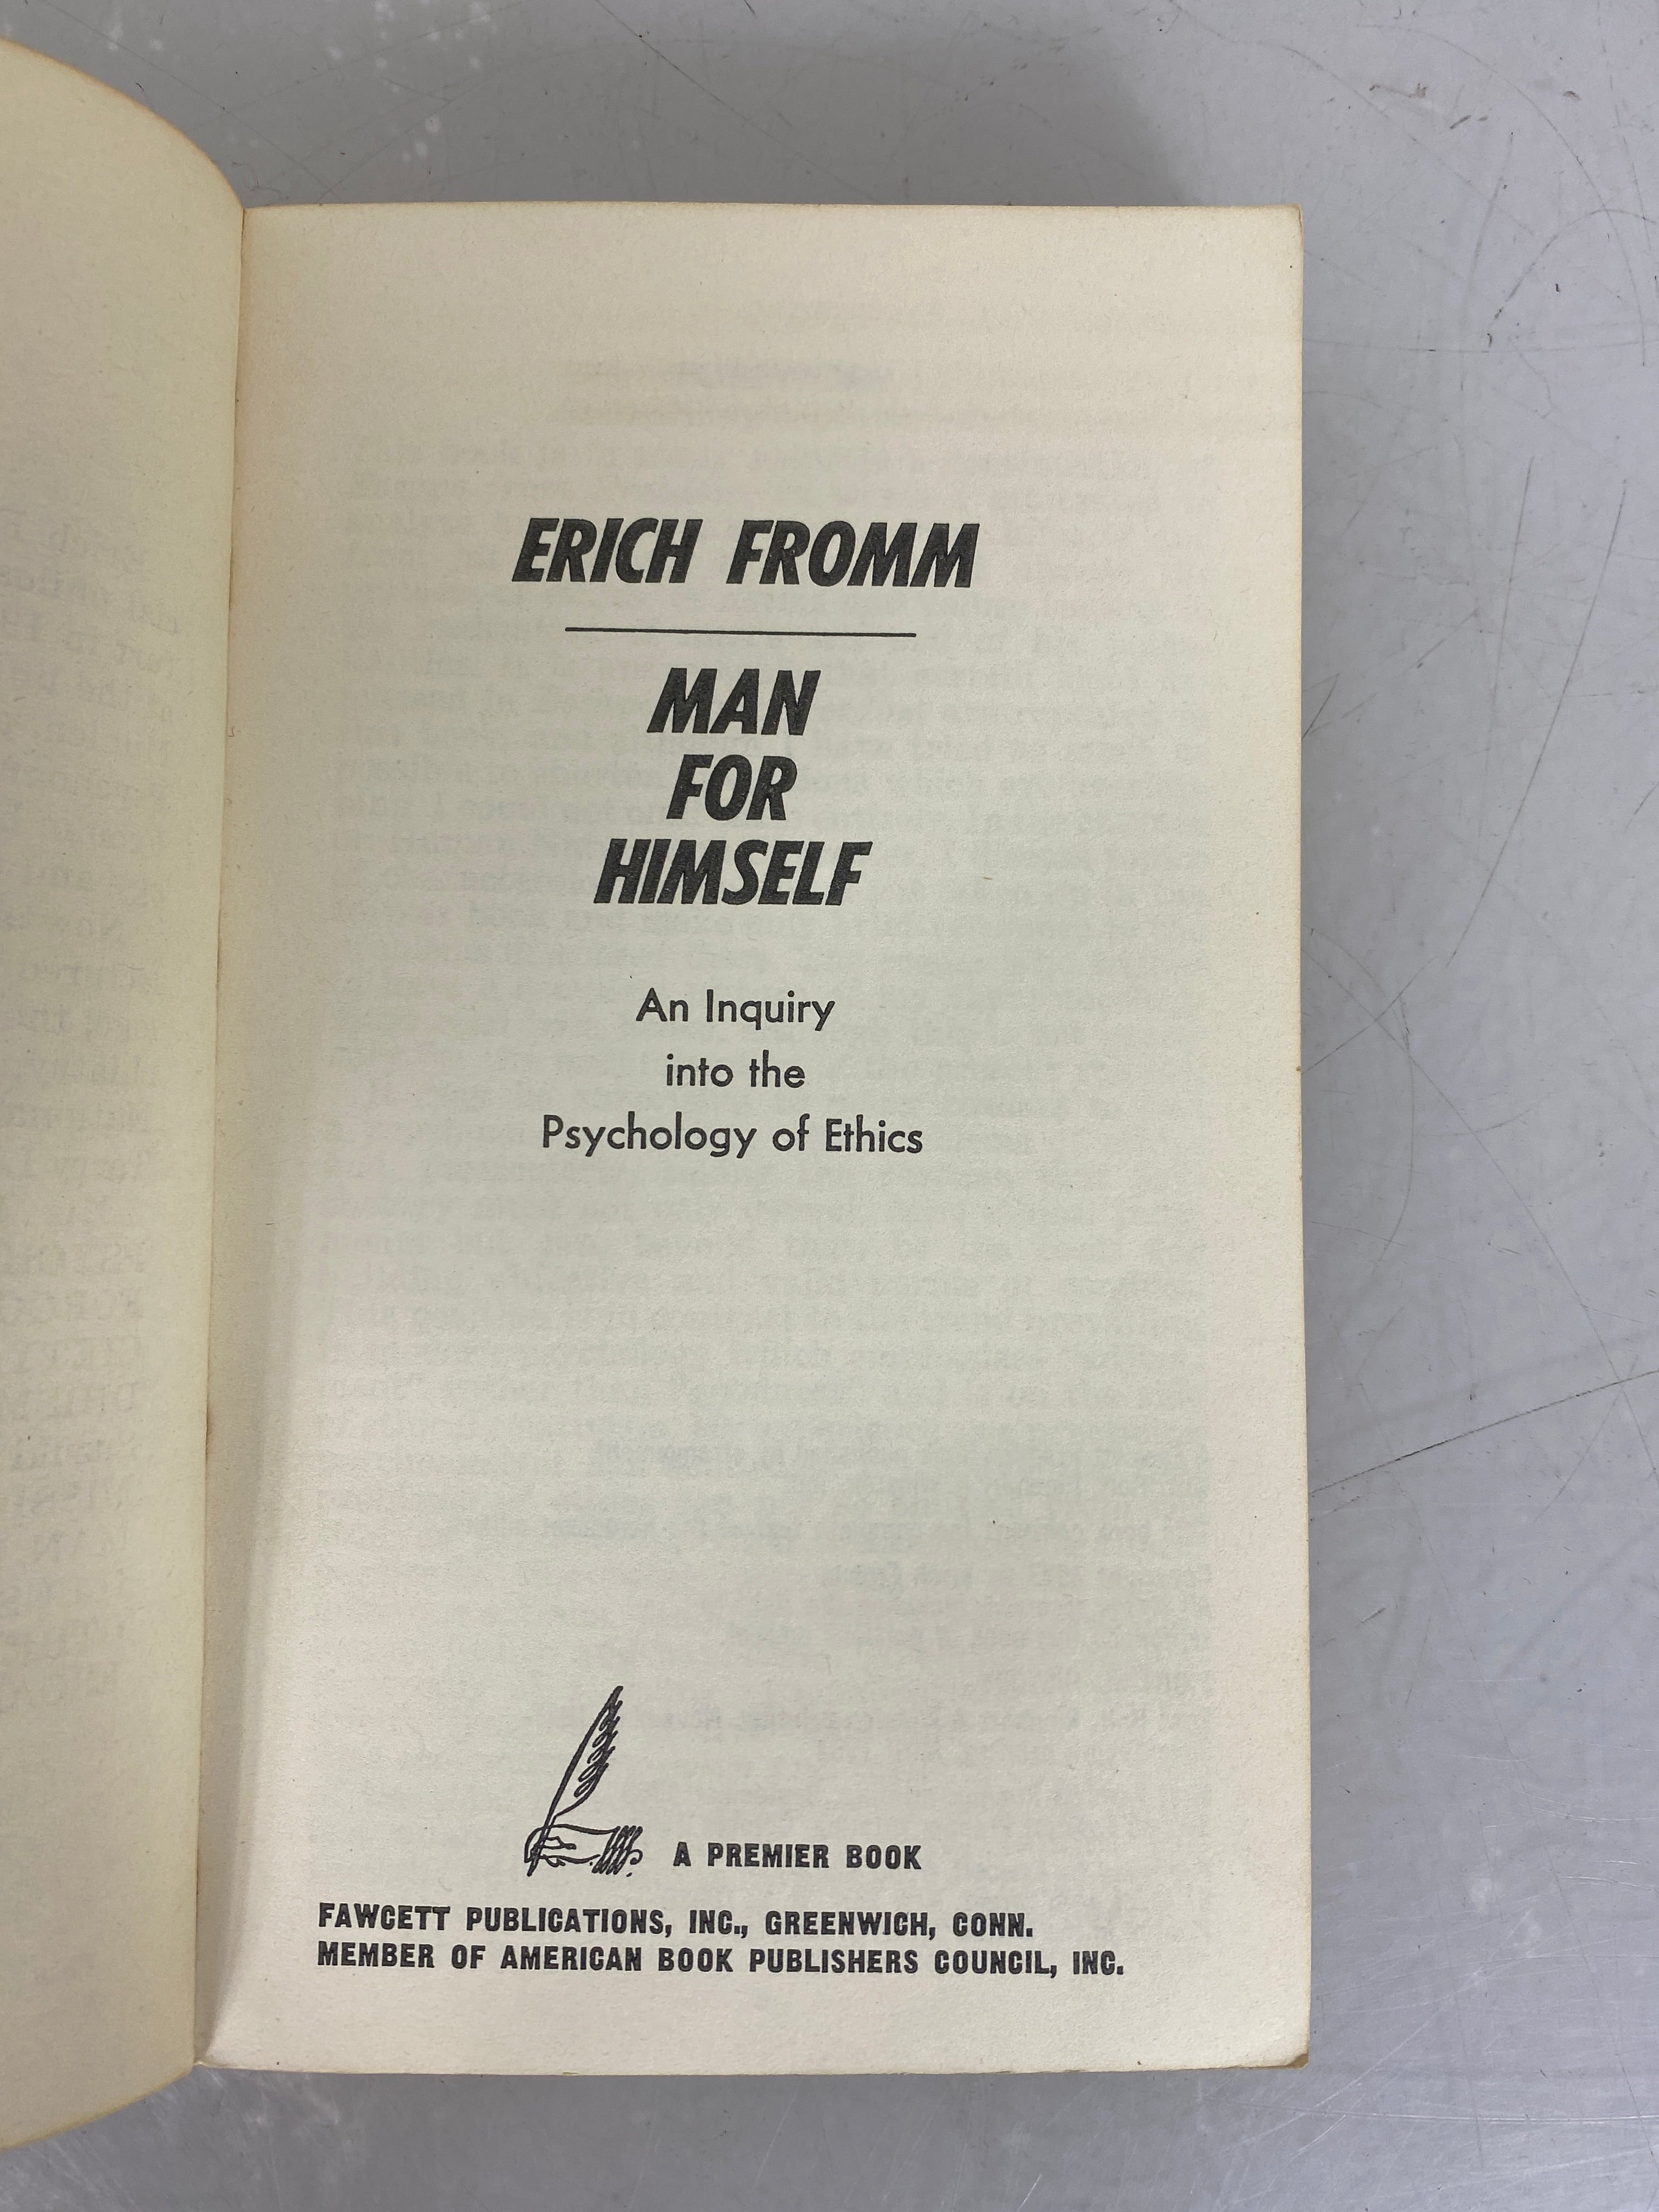 Lot of 3 Erich Fromm Paperback Books 1965-1967 SC